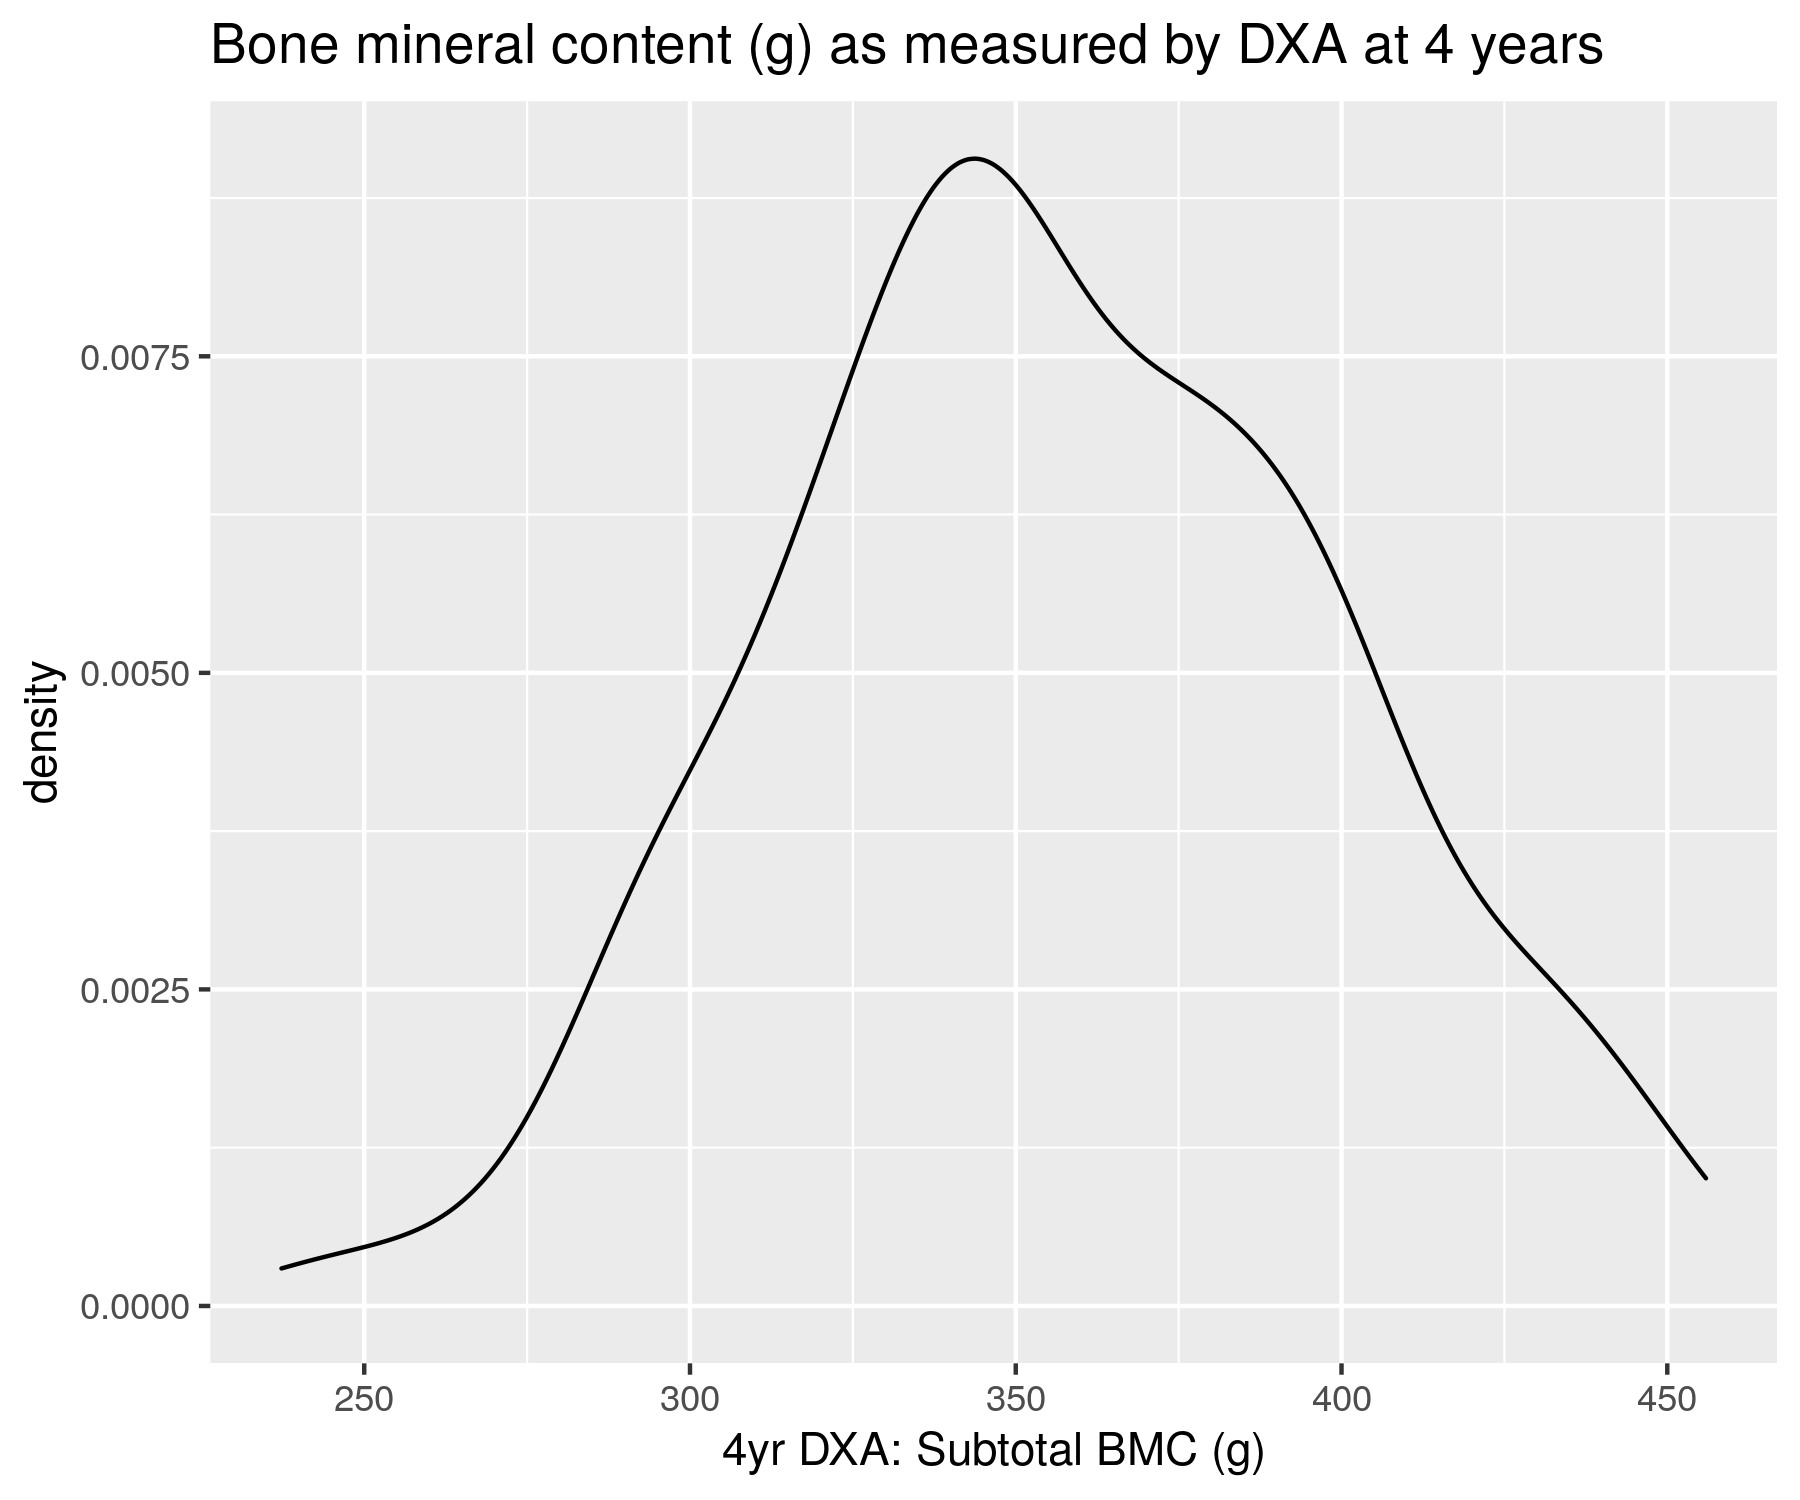 Distribution of whole body (minus head) bone mineral content in grams at 4 years of age.